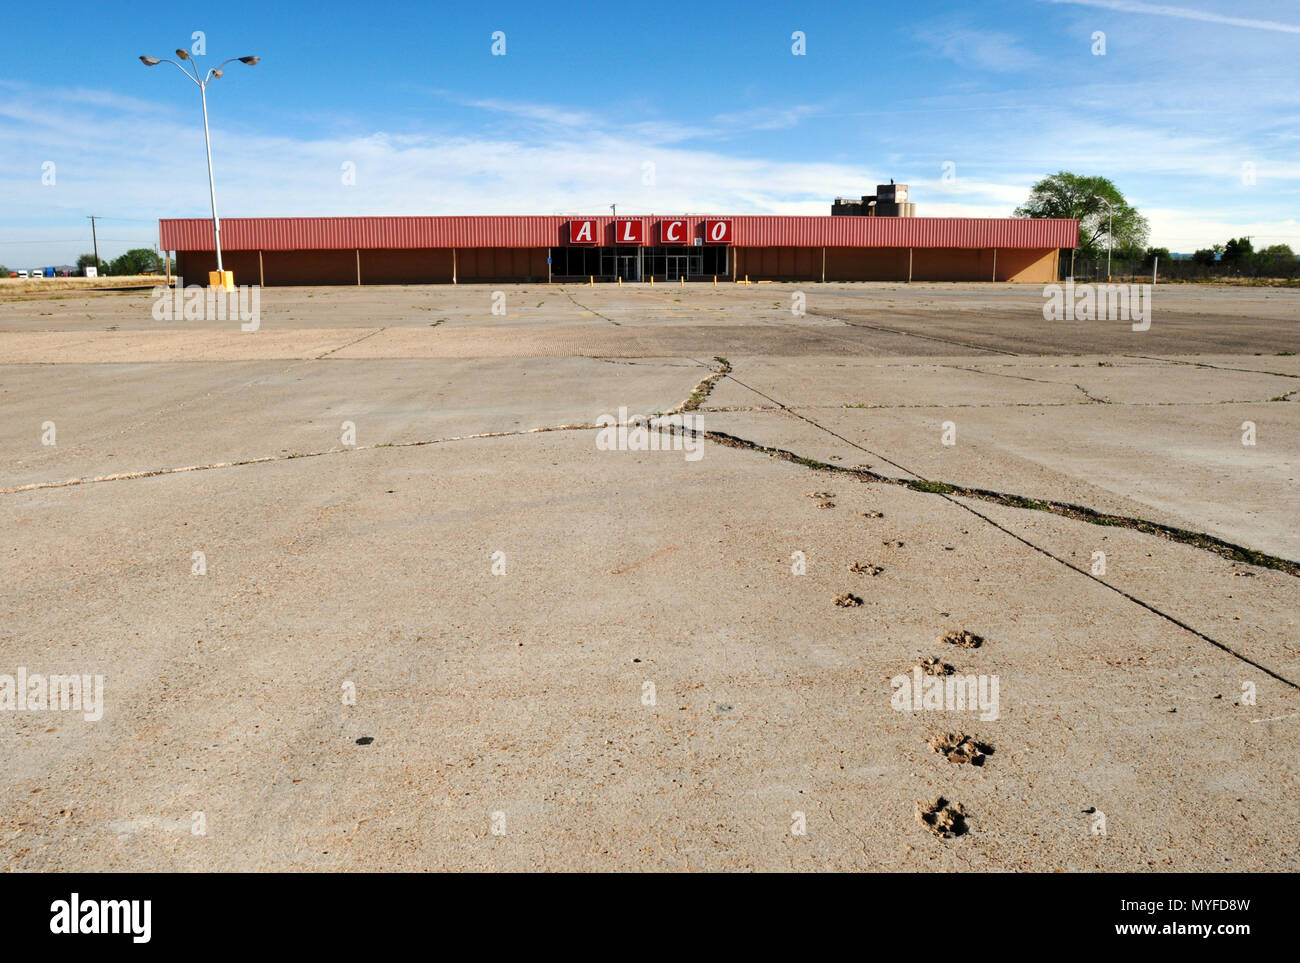 The empty parking lot at a closed ALCO store in Tucumcari, New Mexico. The American retail chain filed for bankruptcy in 2014. Stock Photo